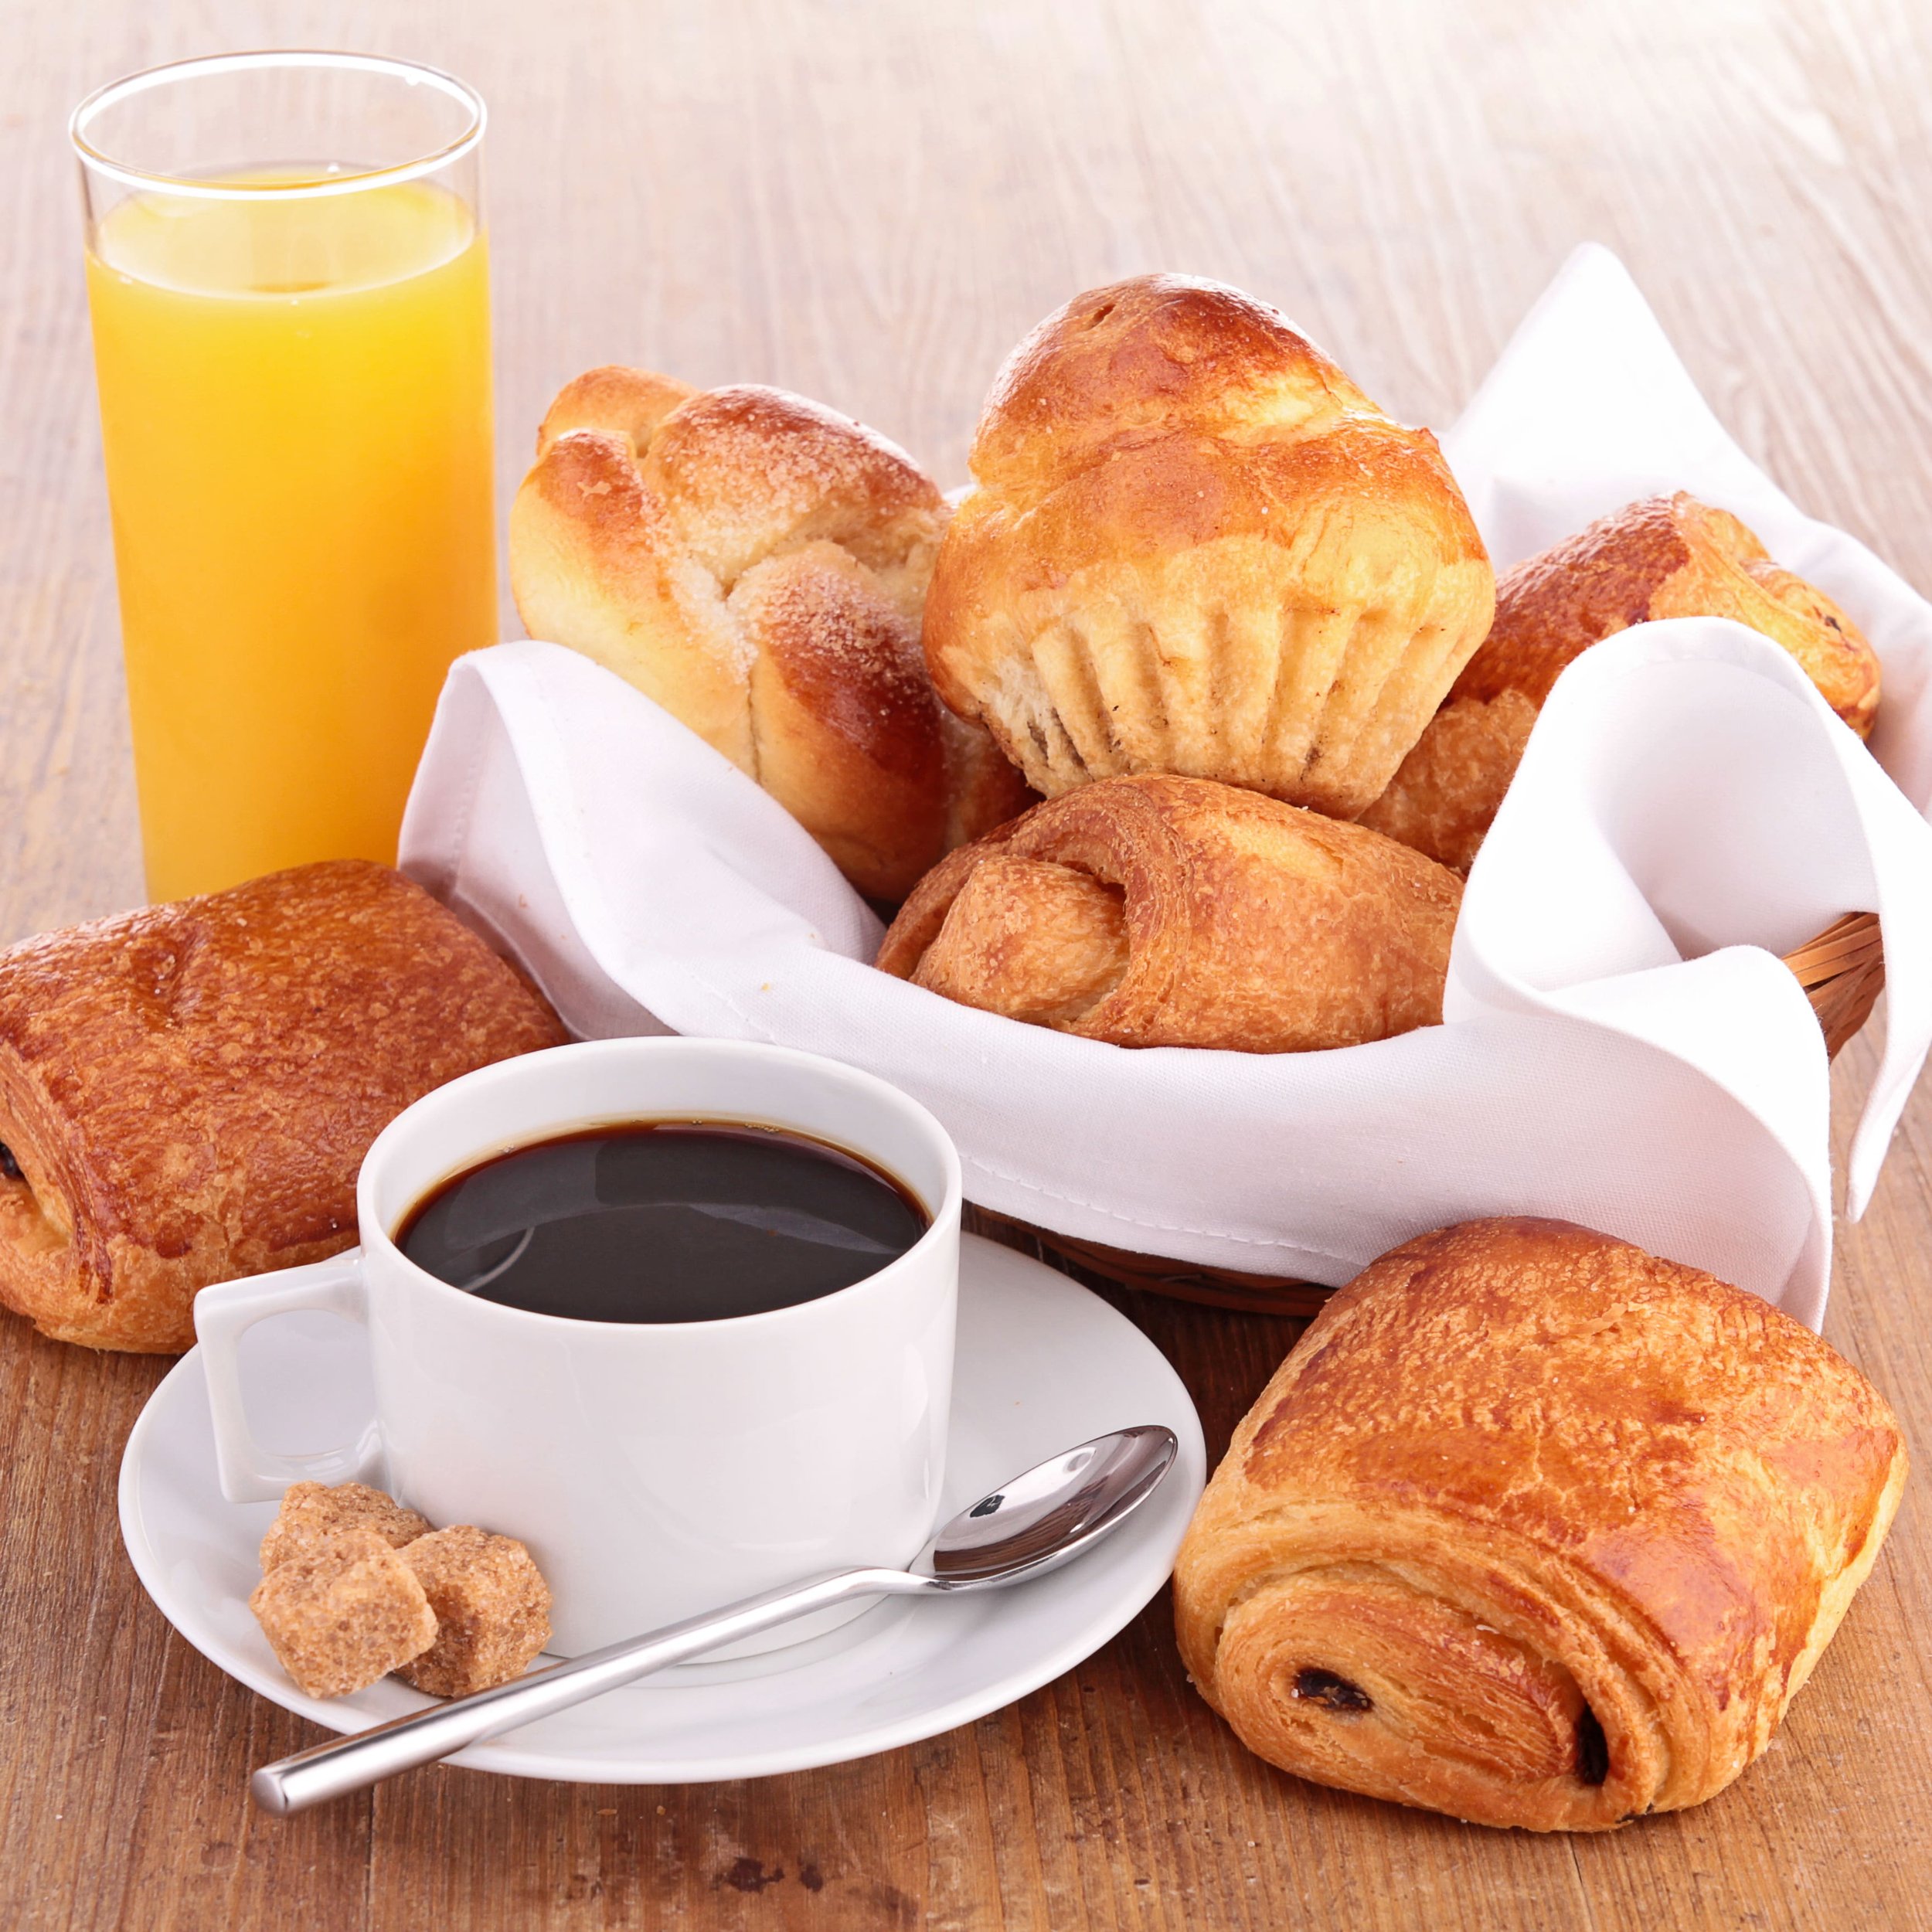 10 traditional French breakfast recipes